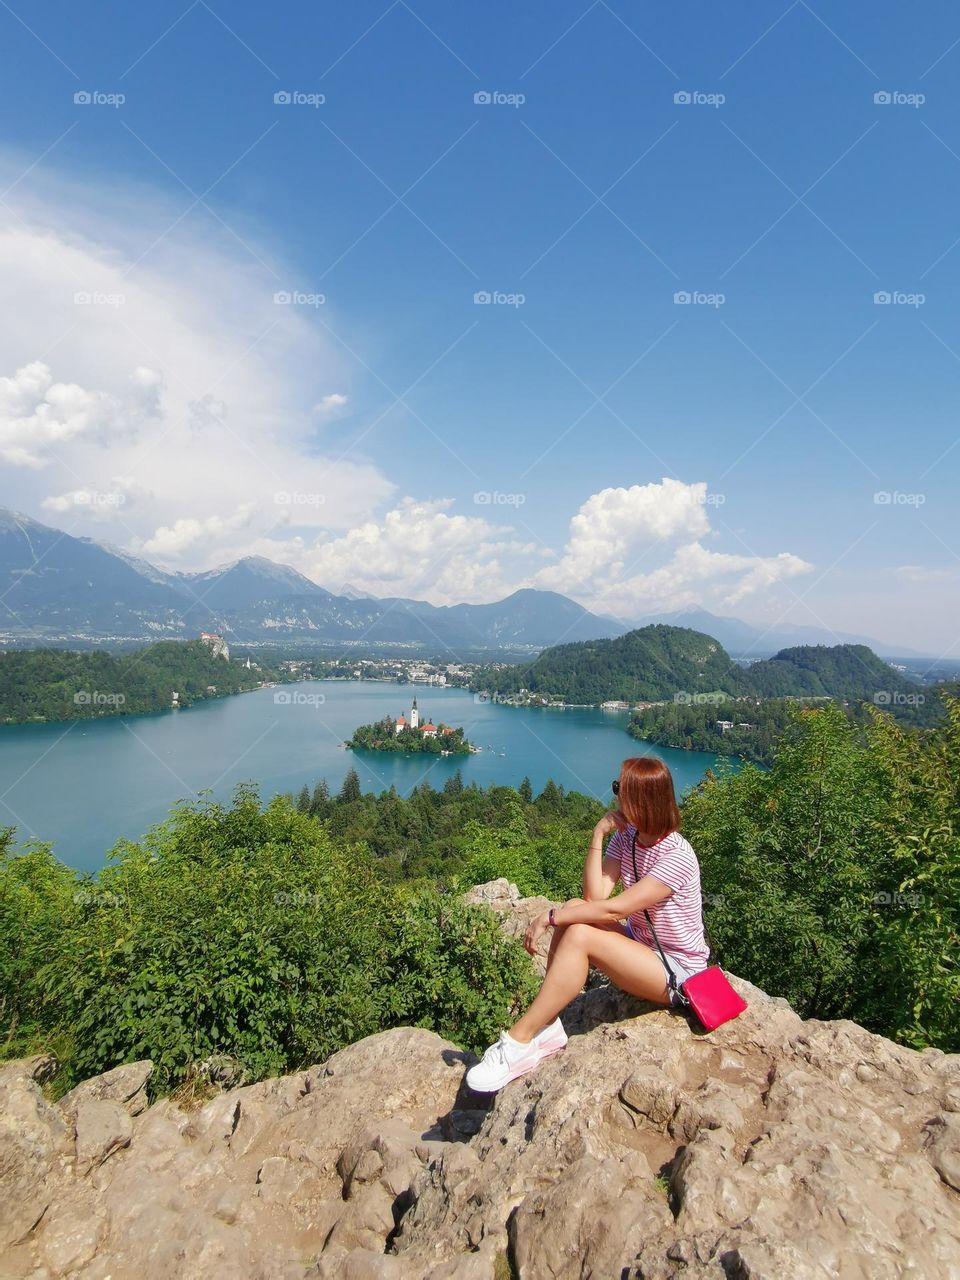 Let's go on a hike. Beautiful view of Bled Lake and Bled Island. Amazing Slovenian nature.